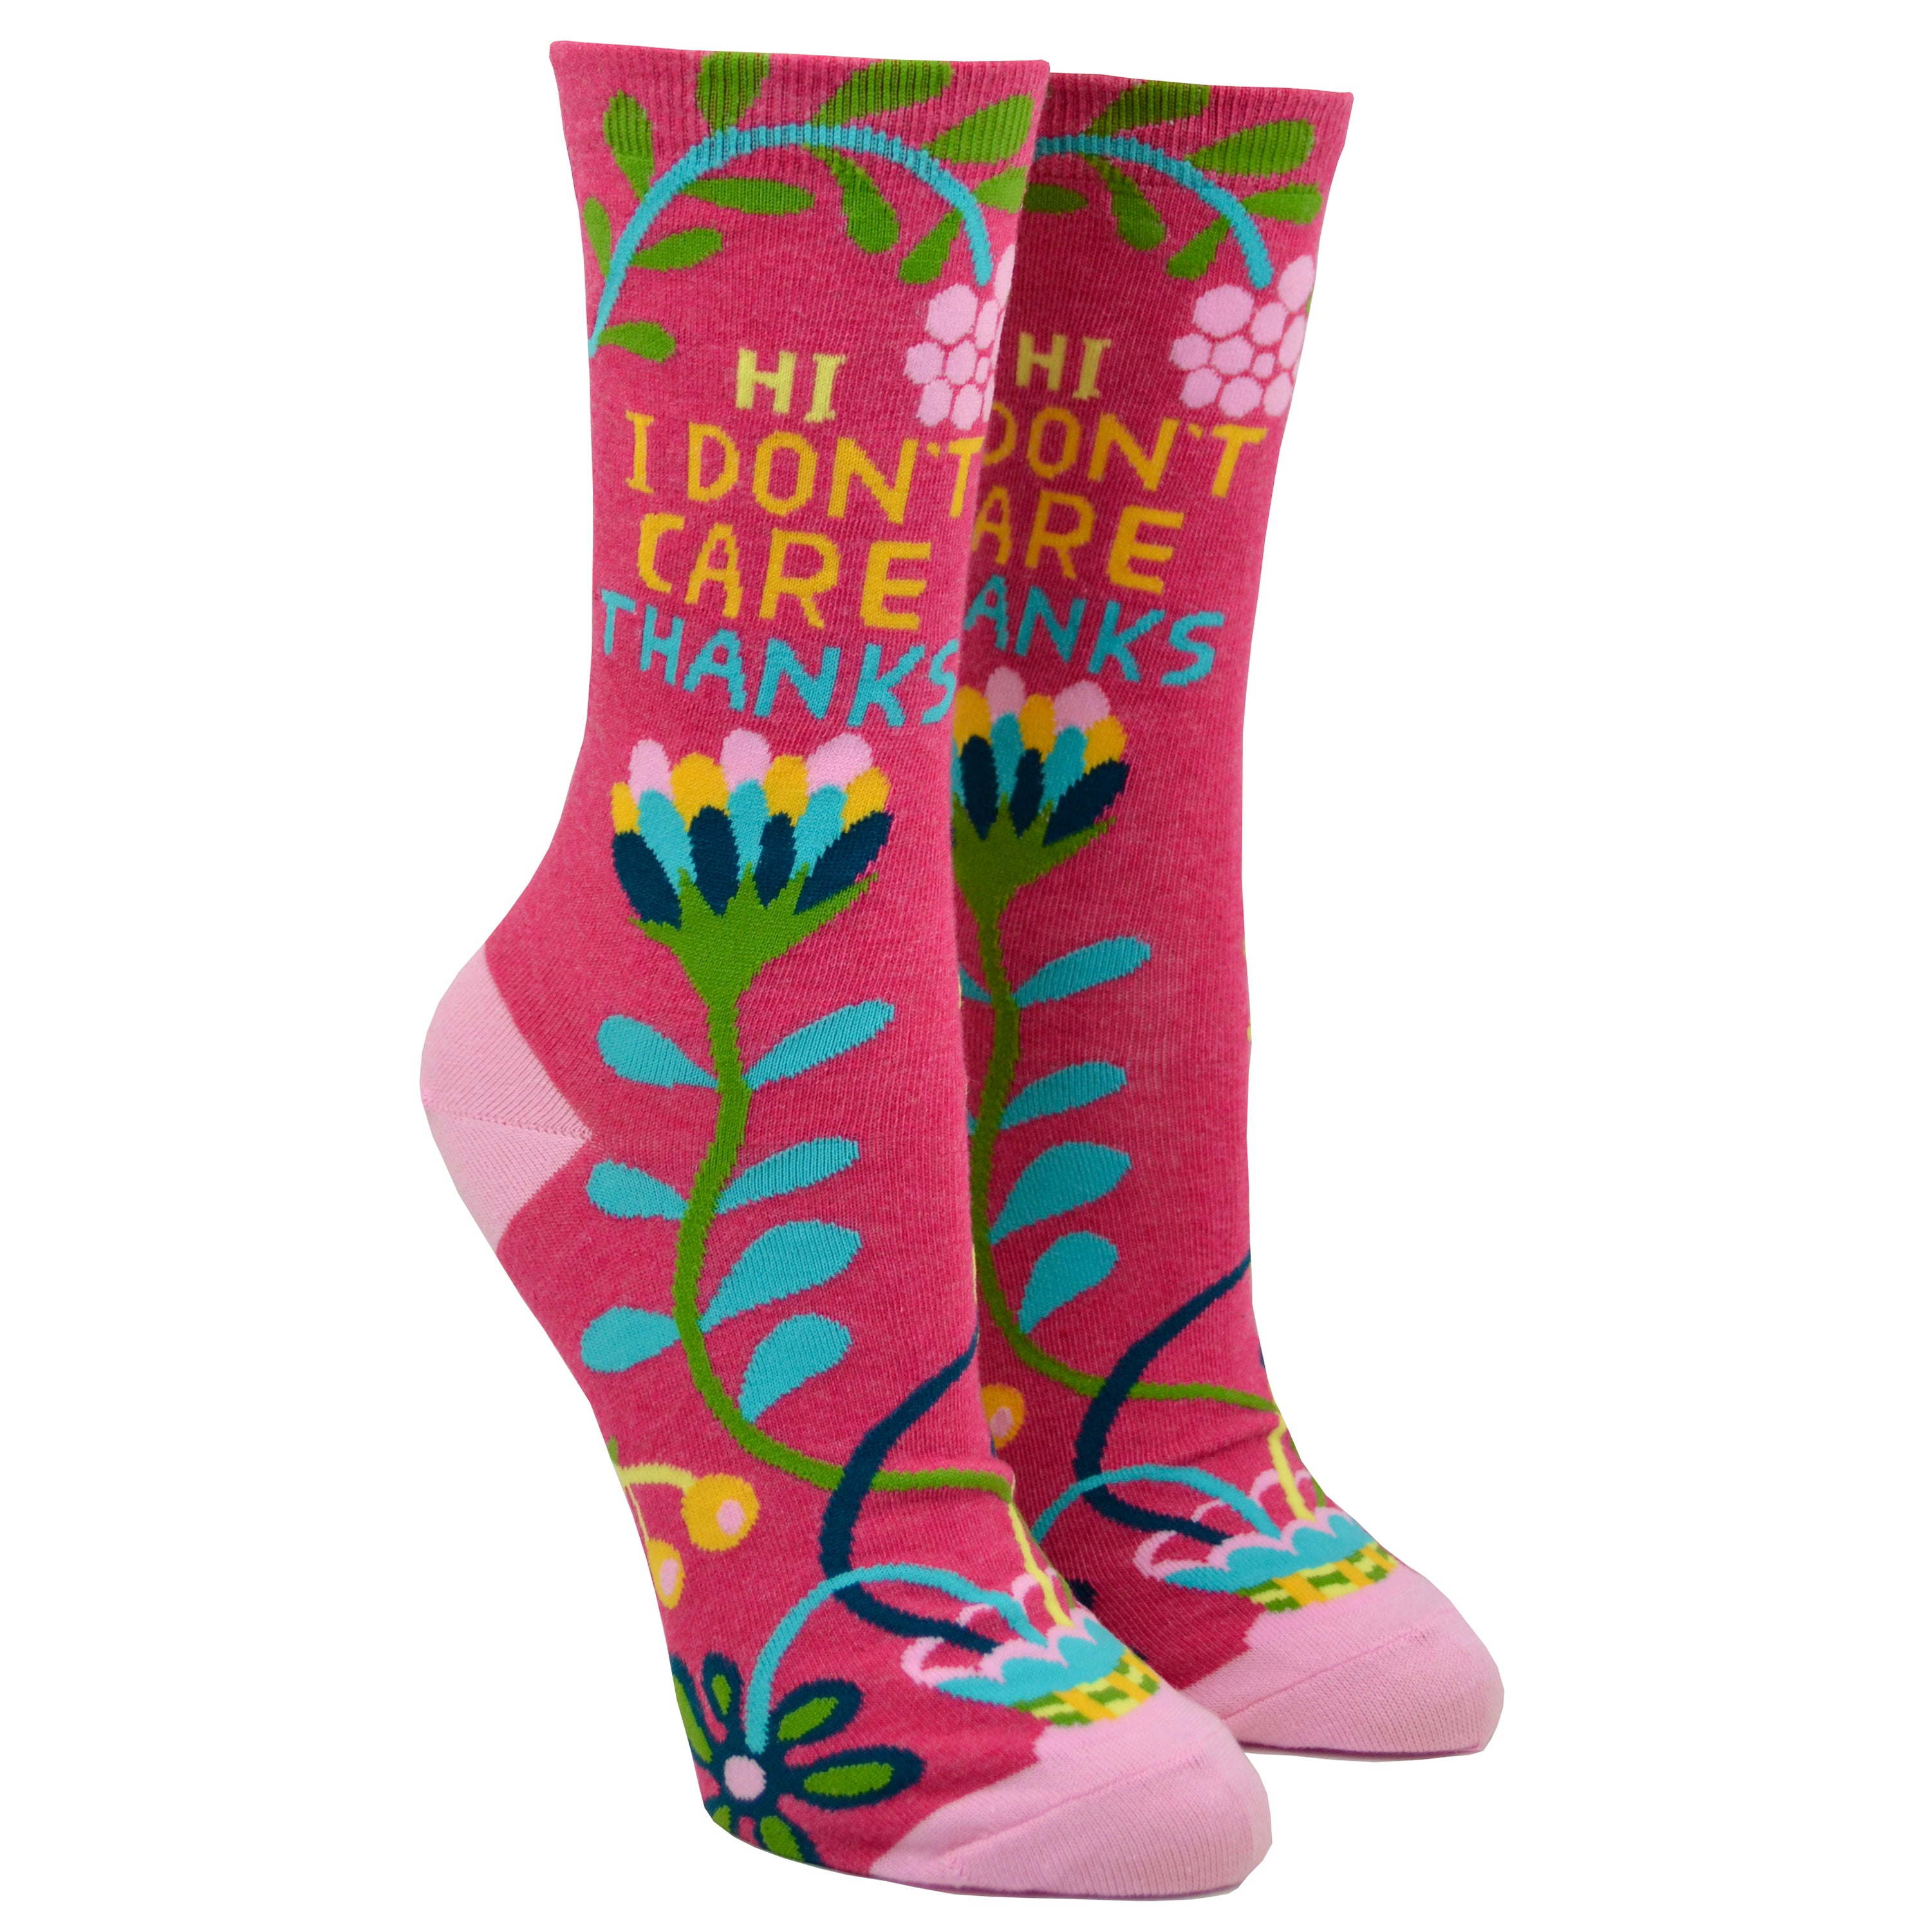 Shown on leg forms, a pair of women's Blue Q brand combed cotton crew socks in hot pink with a light pink heel and toe. This sock features and abstract floral design with the phrase 